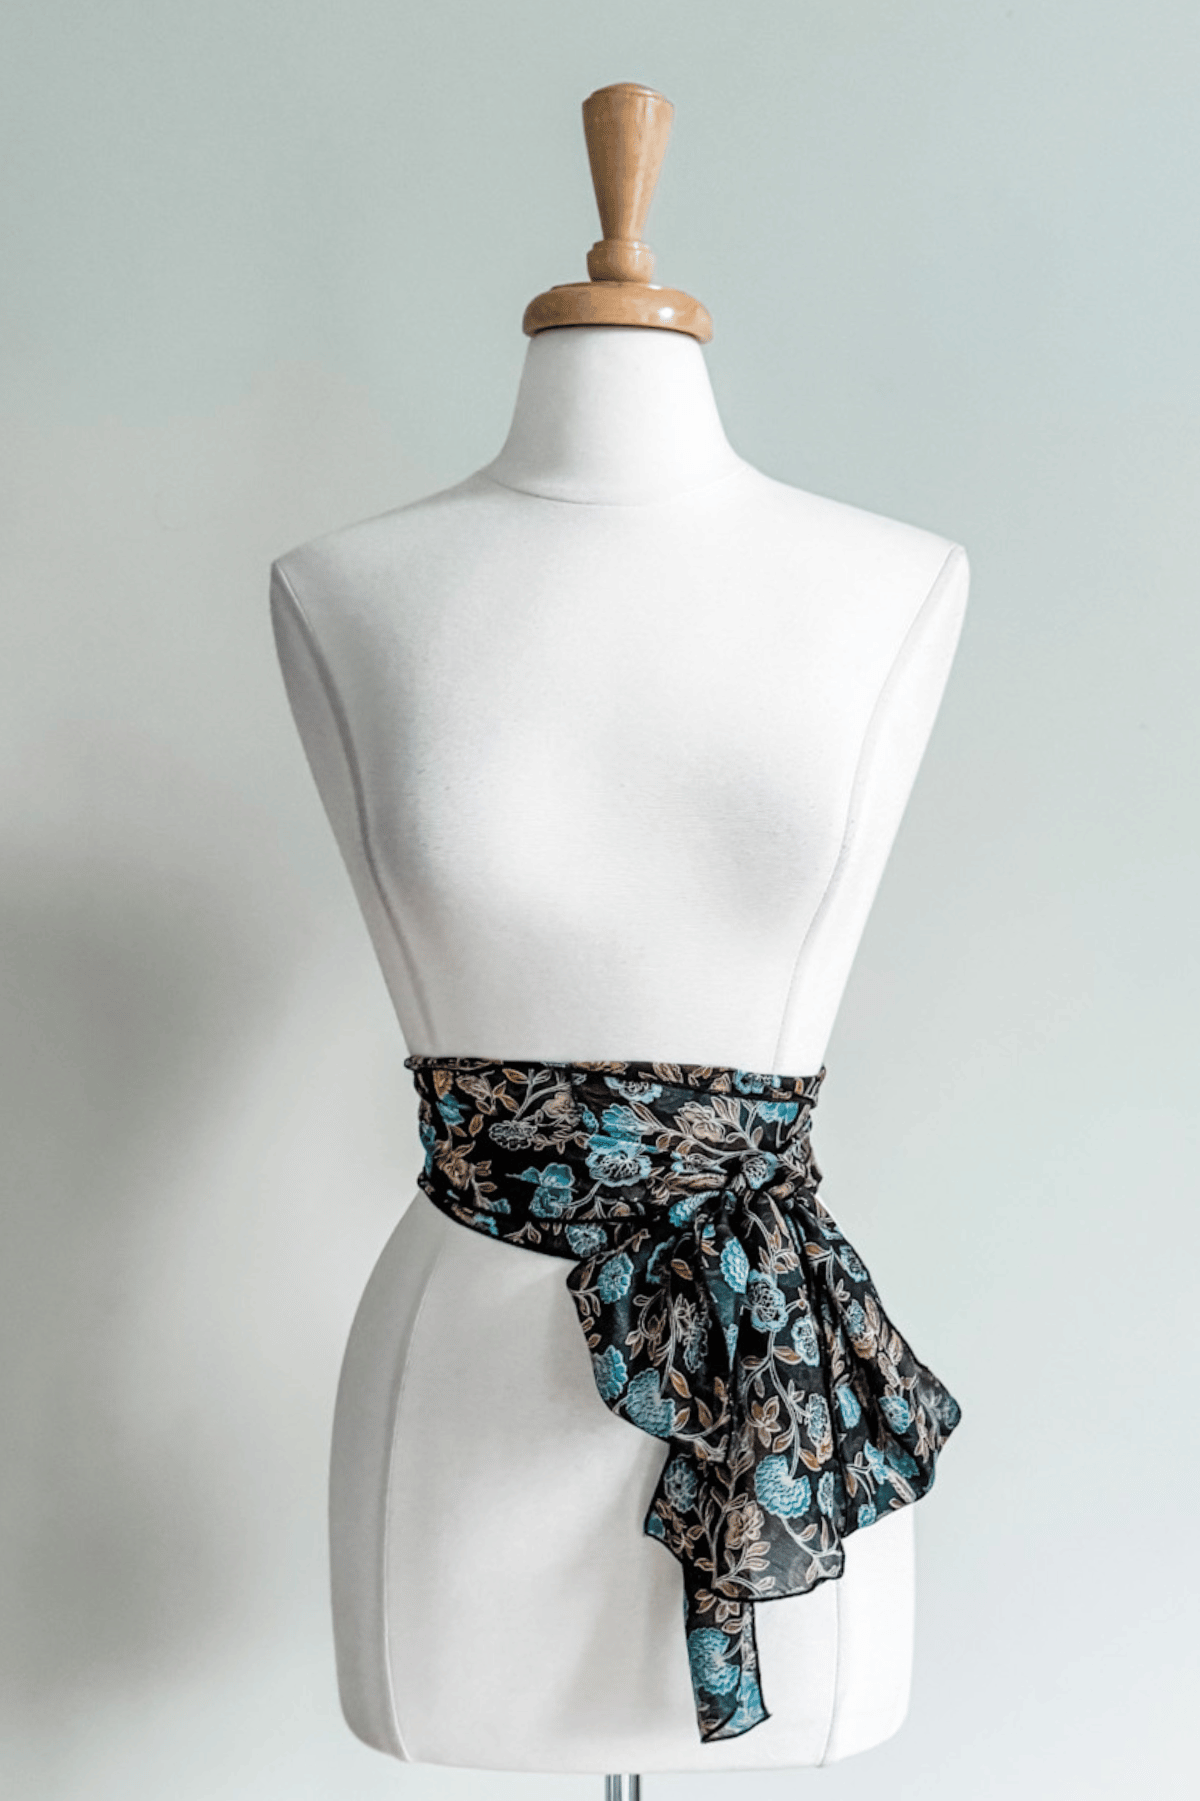 Matching Sash in Turquoise Blossom